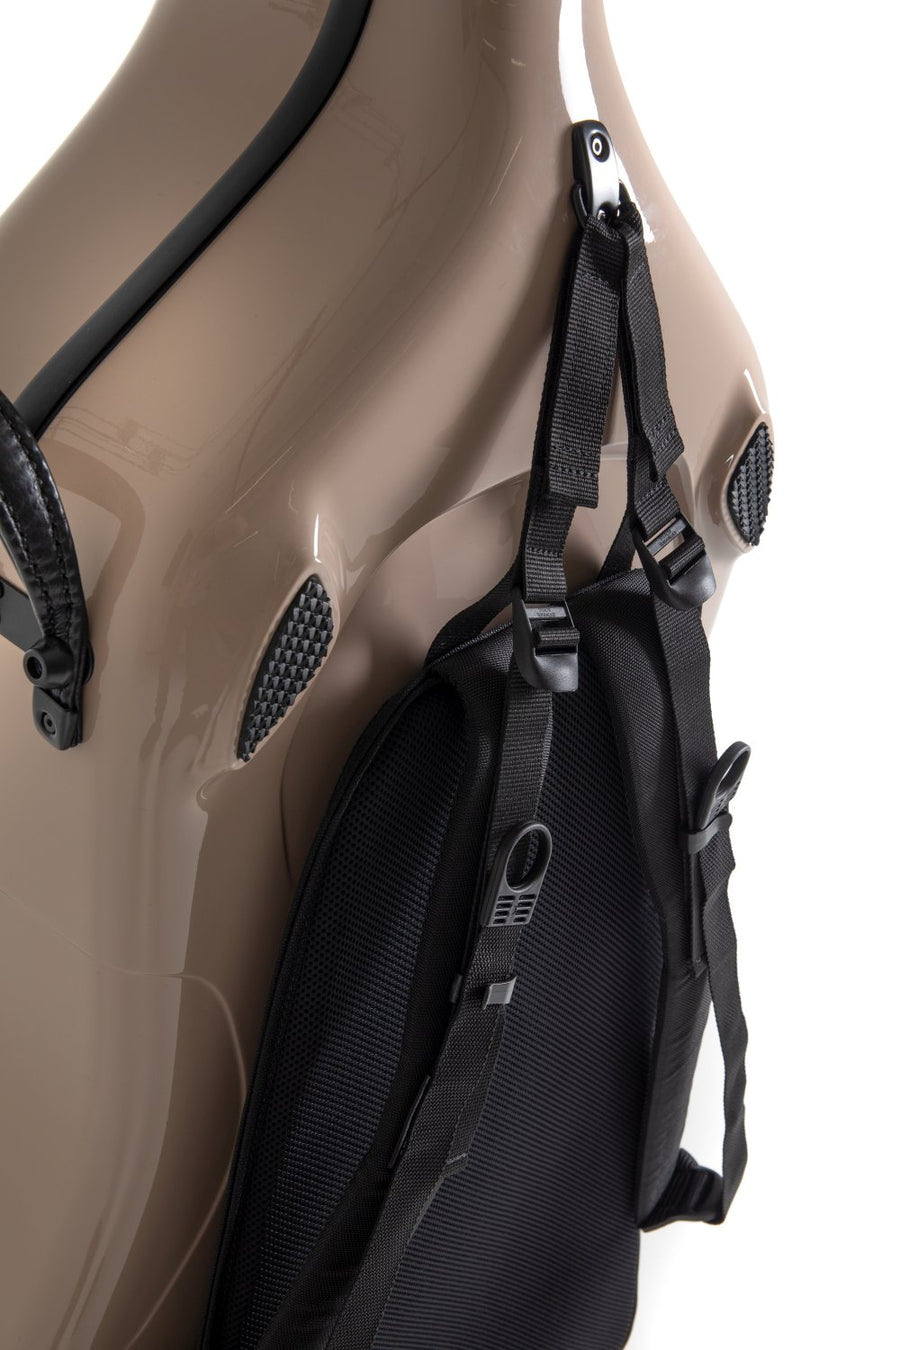 Rucksack System for Air Cello Cases with 3-Point D-ring System